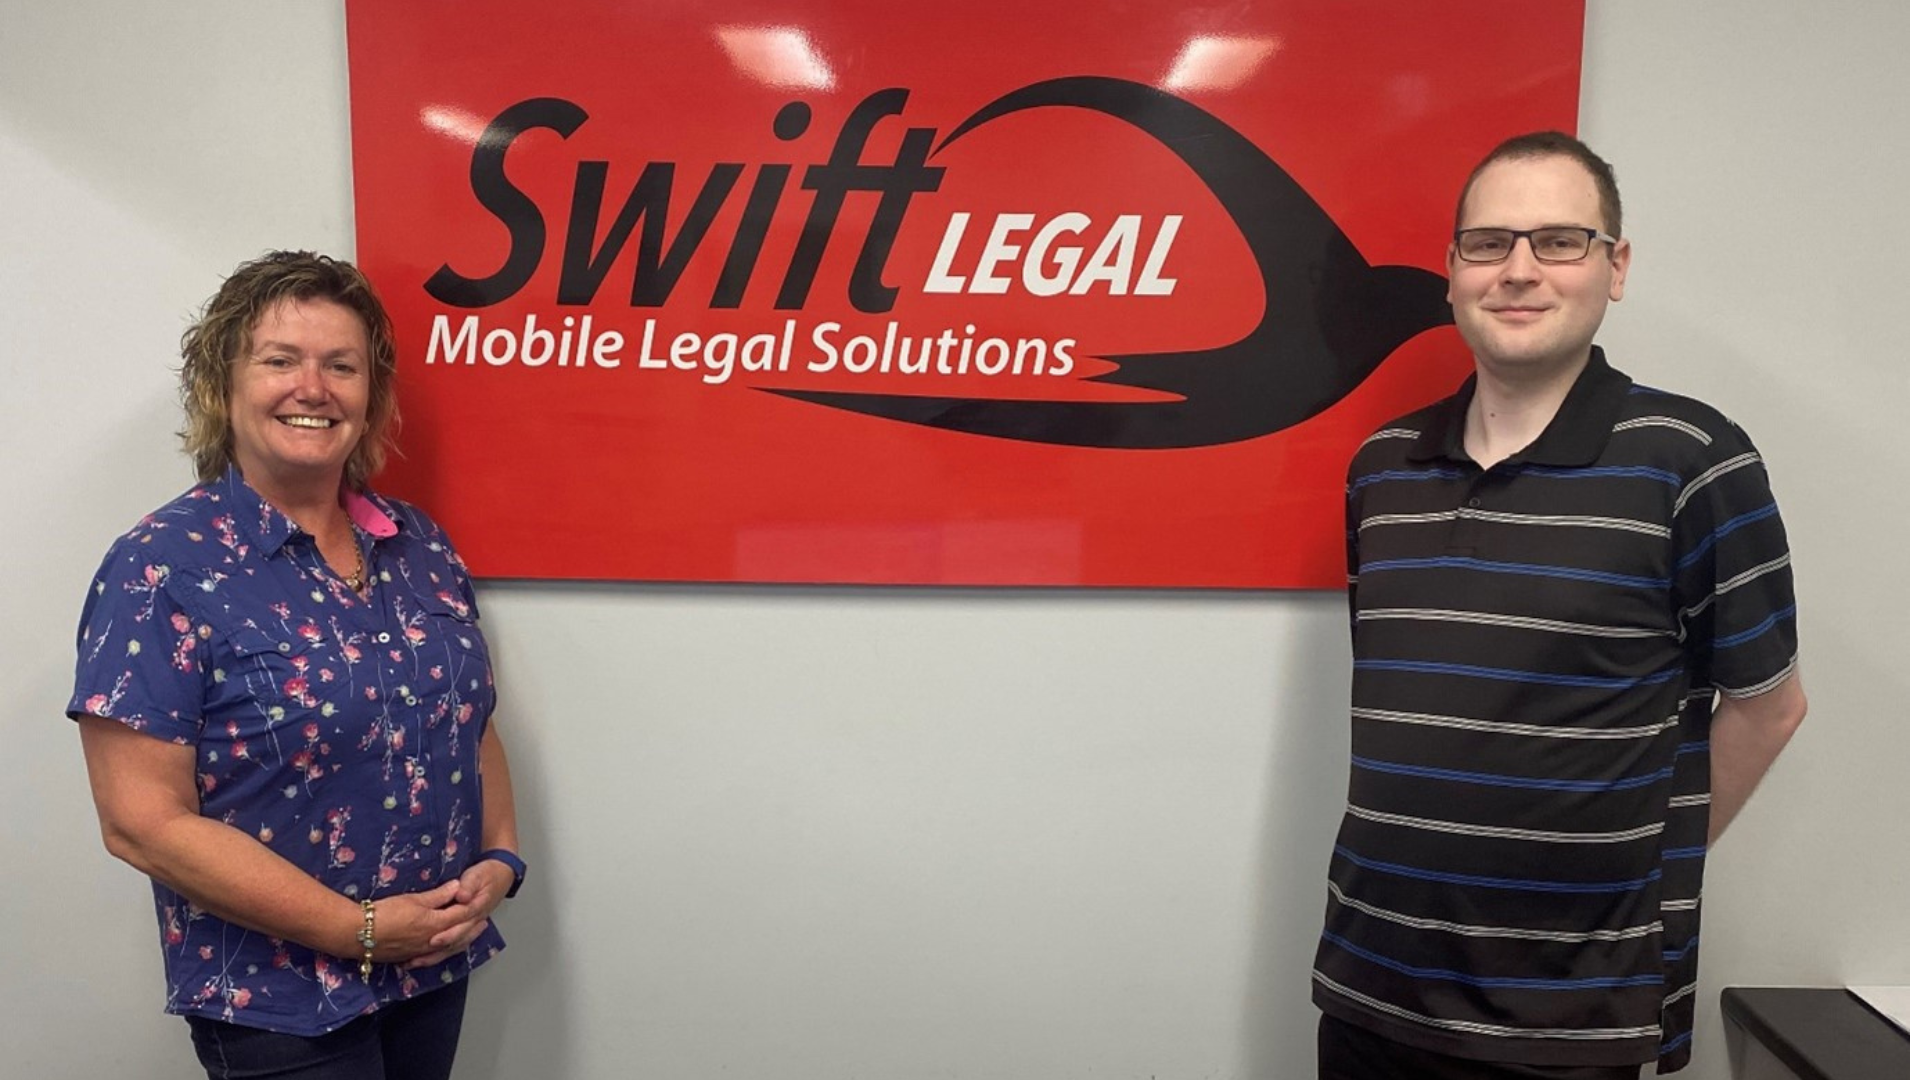 Chris is pictured standing next to his employer Judica, standing in front of a large red "Swift Legal" sign